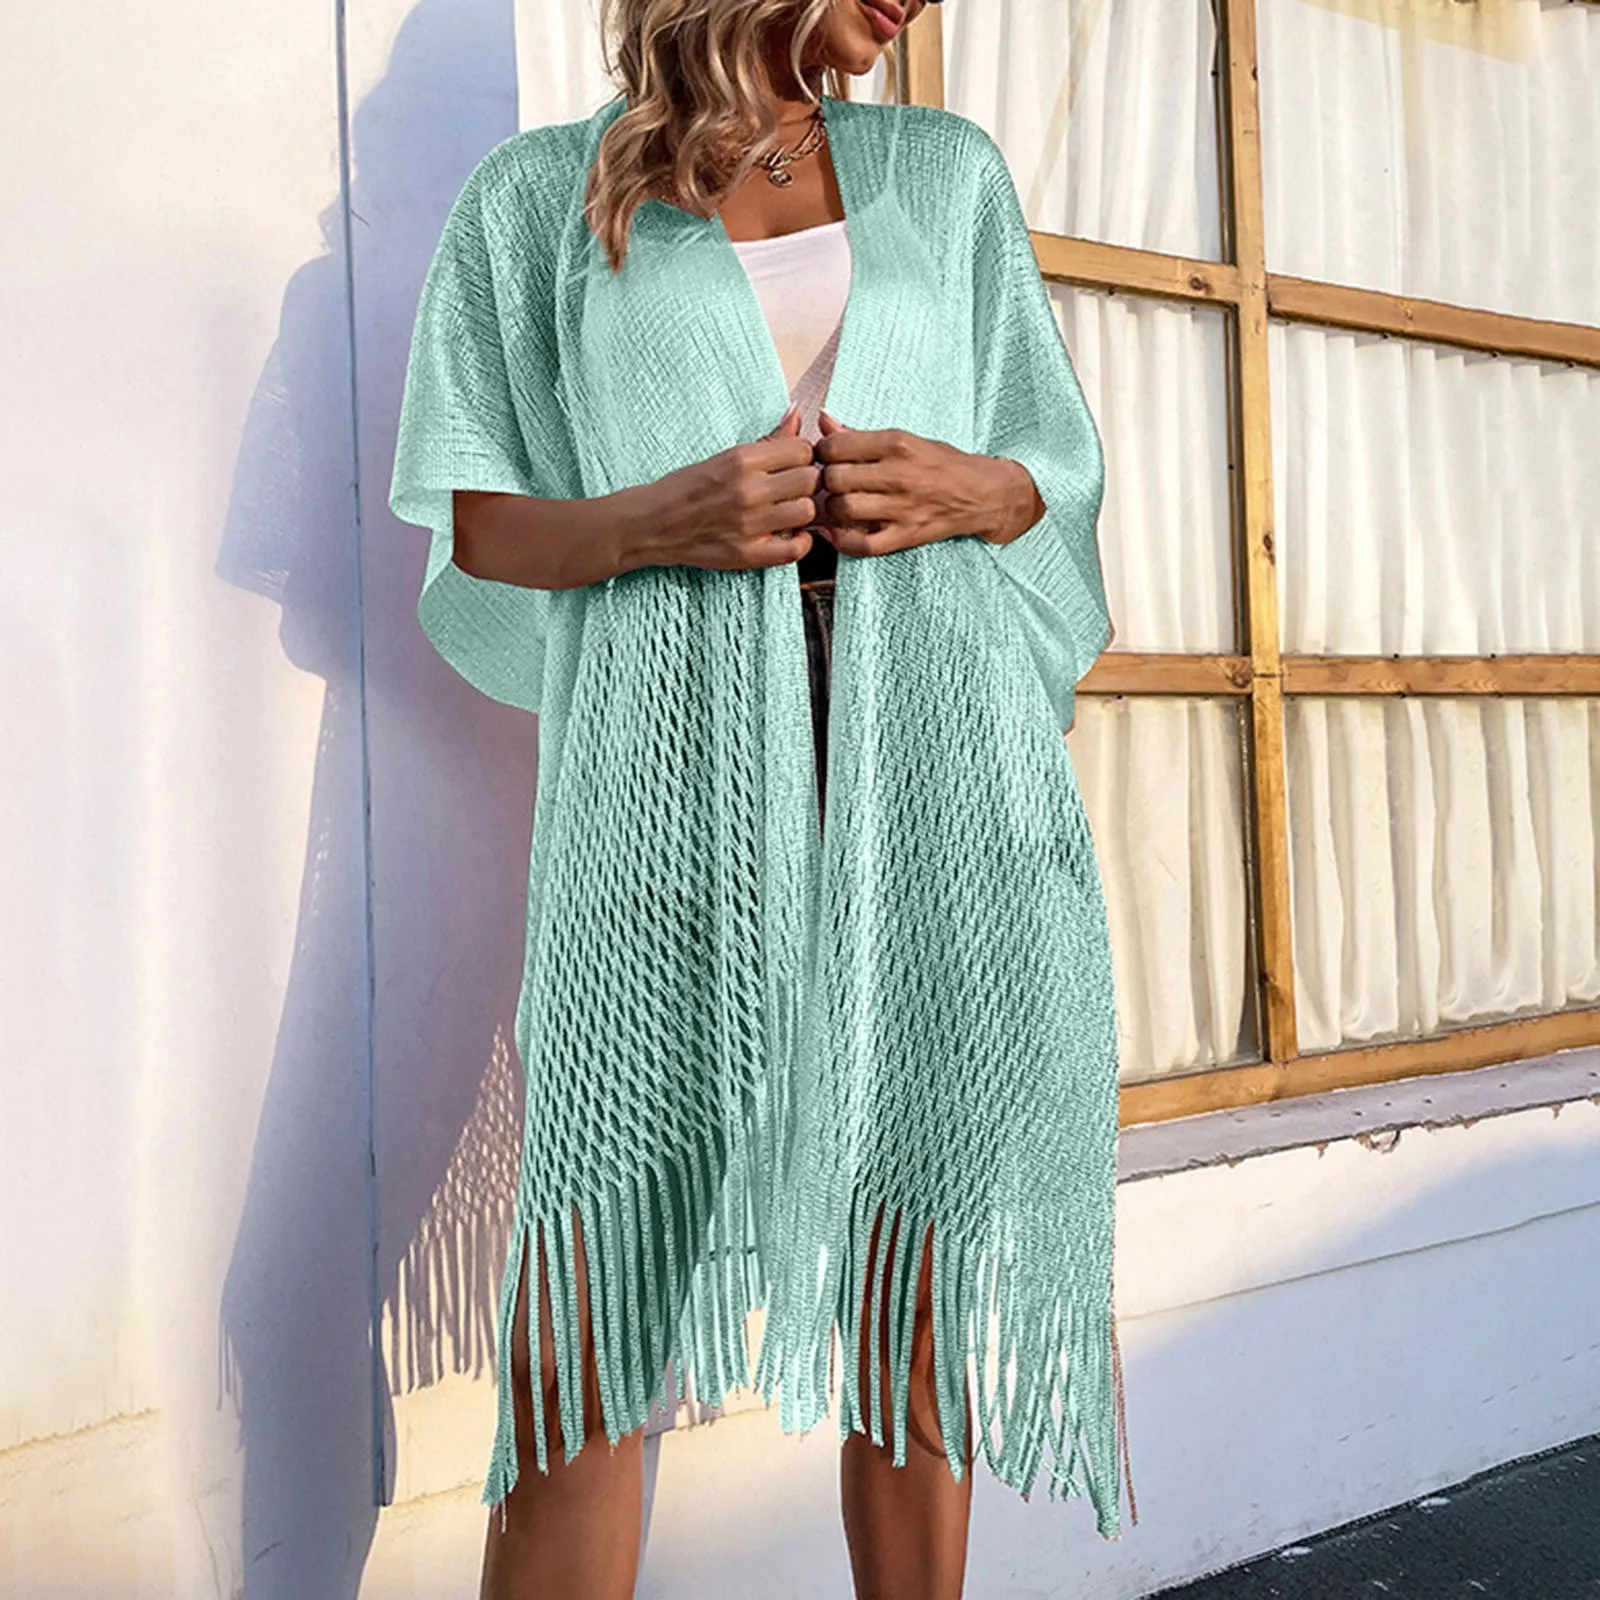 Knitted Hollow Casual Cardigan Sun Protection Beach Fringed Cape Smock Coat Rainbow Women Summer Solid Kimono Tassel Shirt Top enlarge